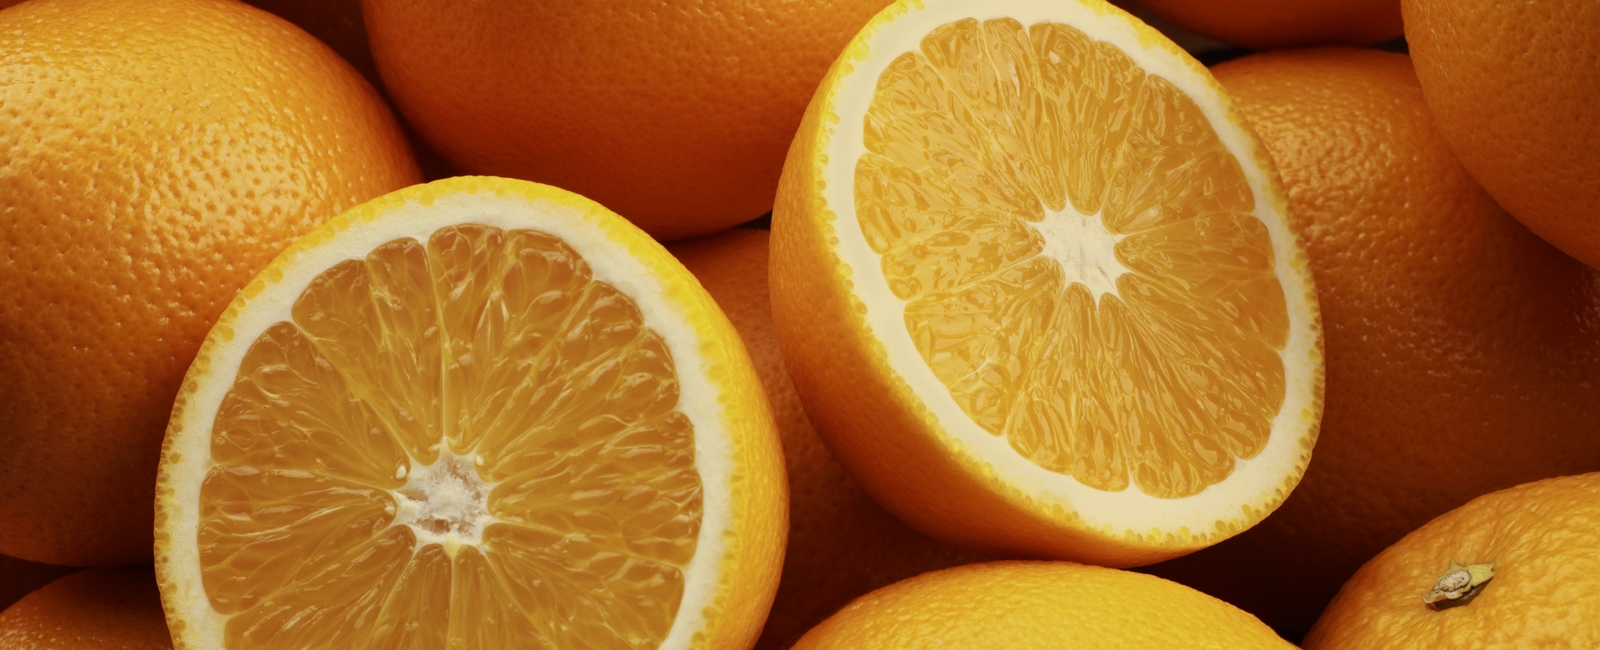 Role of Manganese in Citrus Production